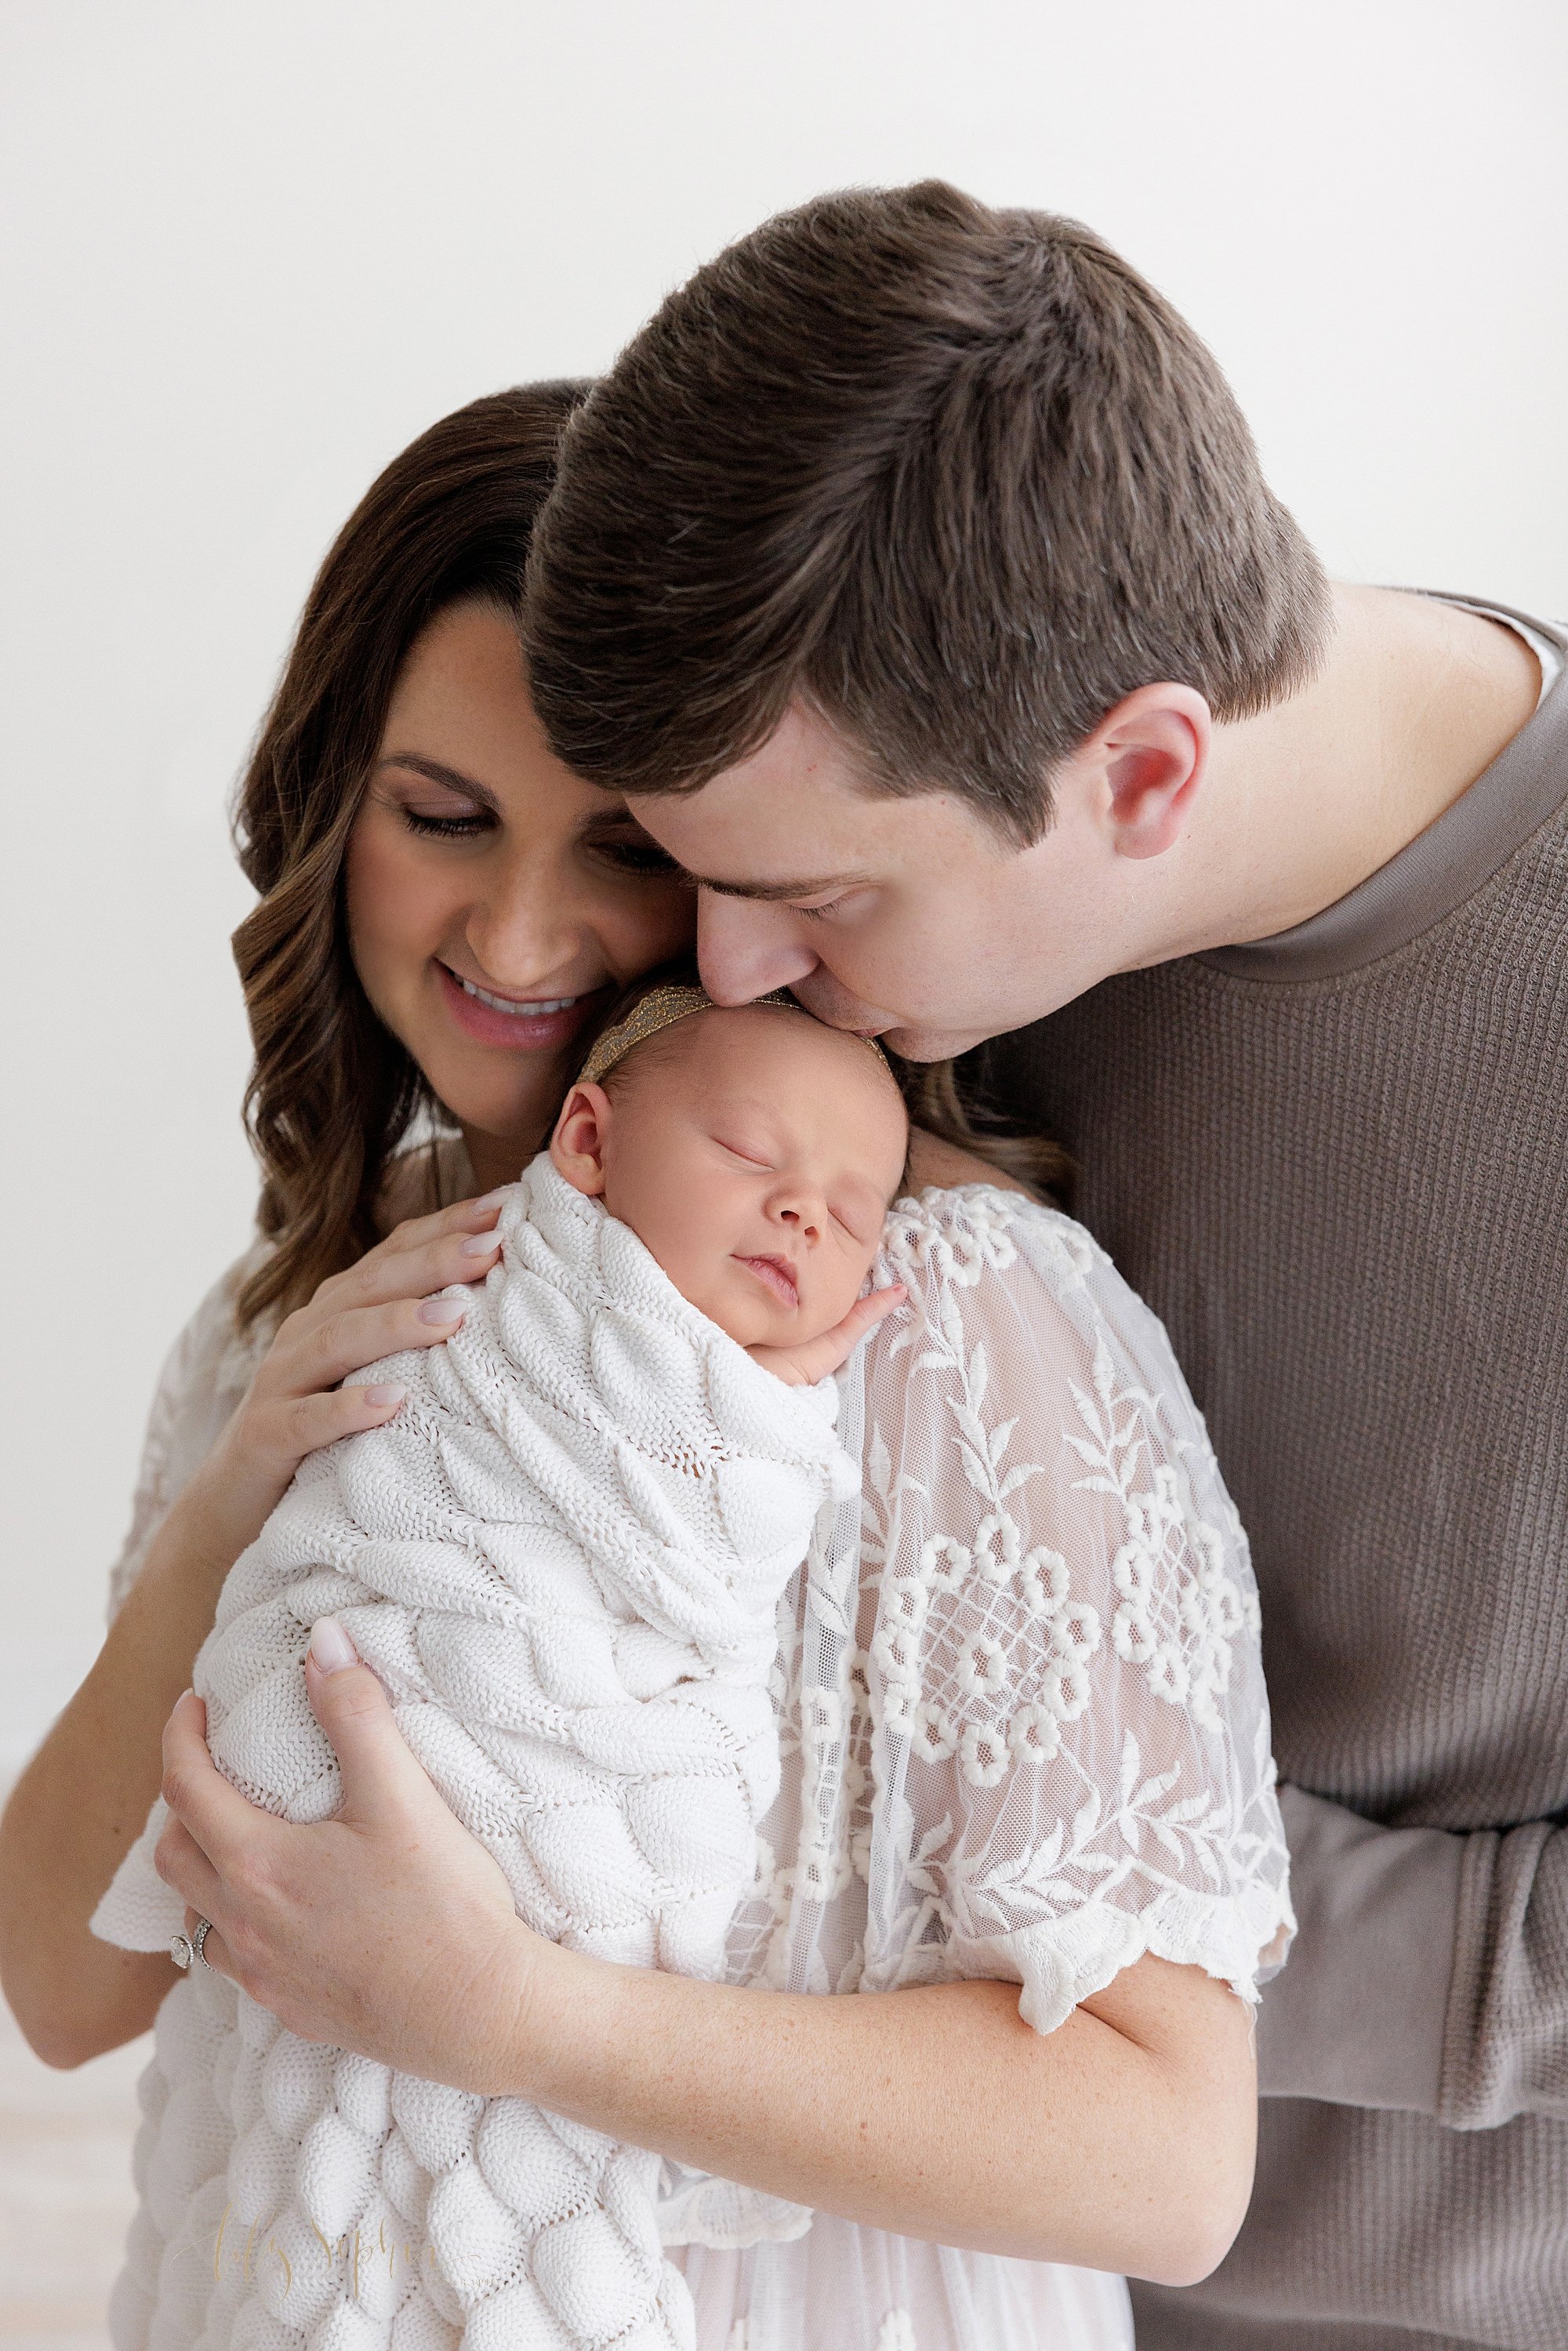  Newborn picture of a sleeping newborn baby girl being held against her mother’s left shoulder her husband stands behind her and bends over her shoulder to kiss their daughter/s forehead taken in natural light in a photography studio near Ansley Park